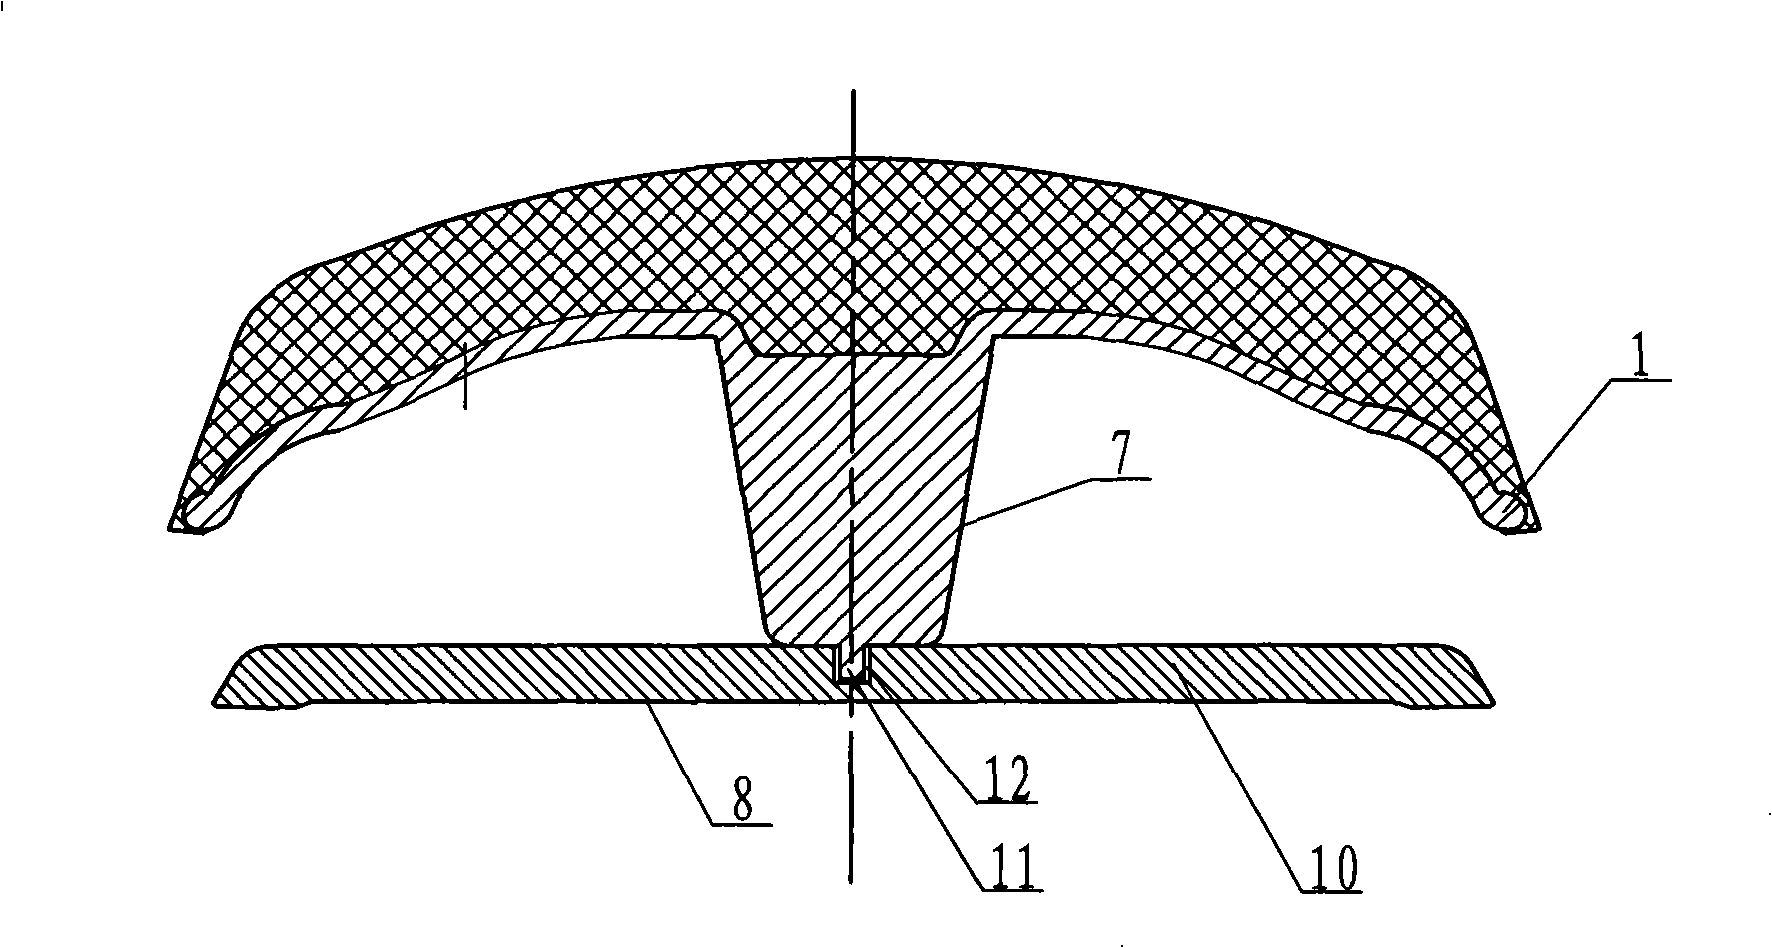 Assembly limit structure of motorcycle cushion